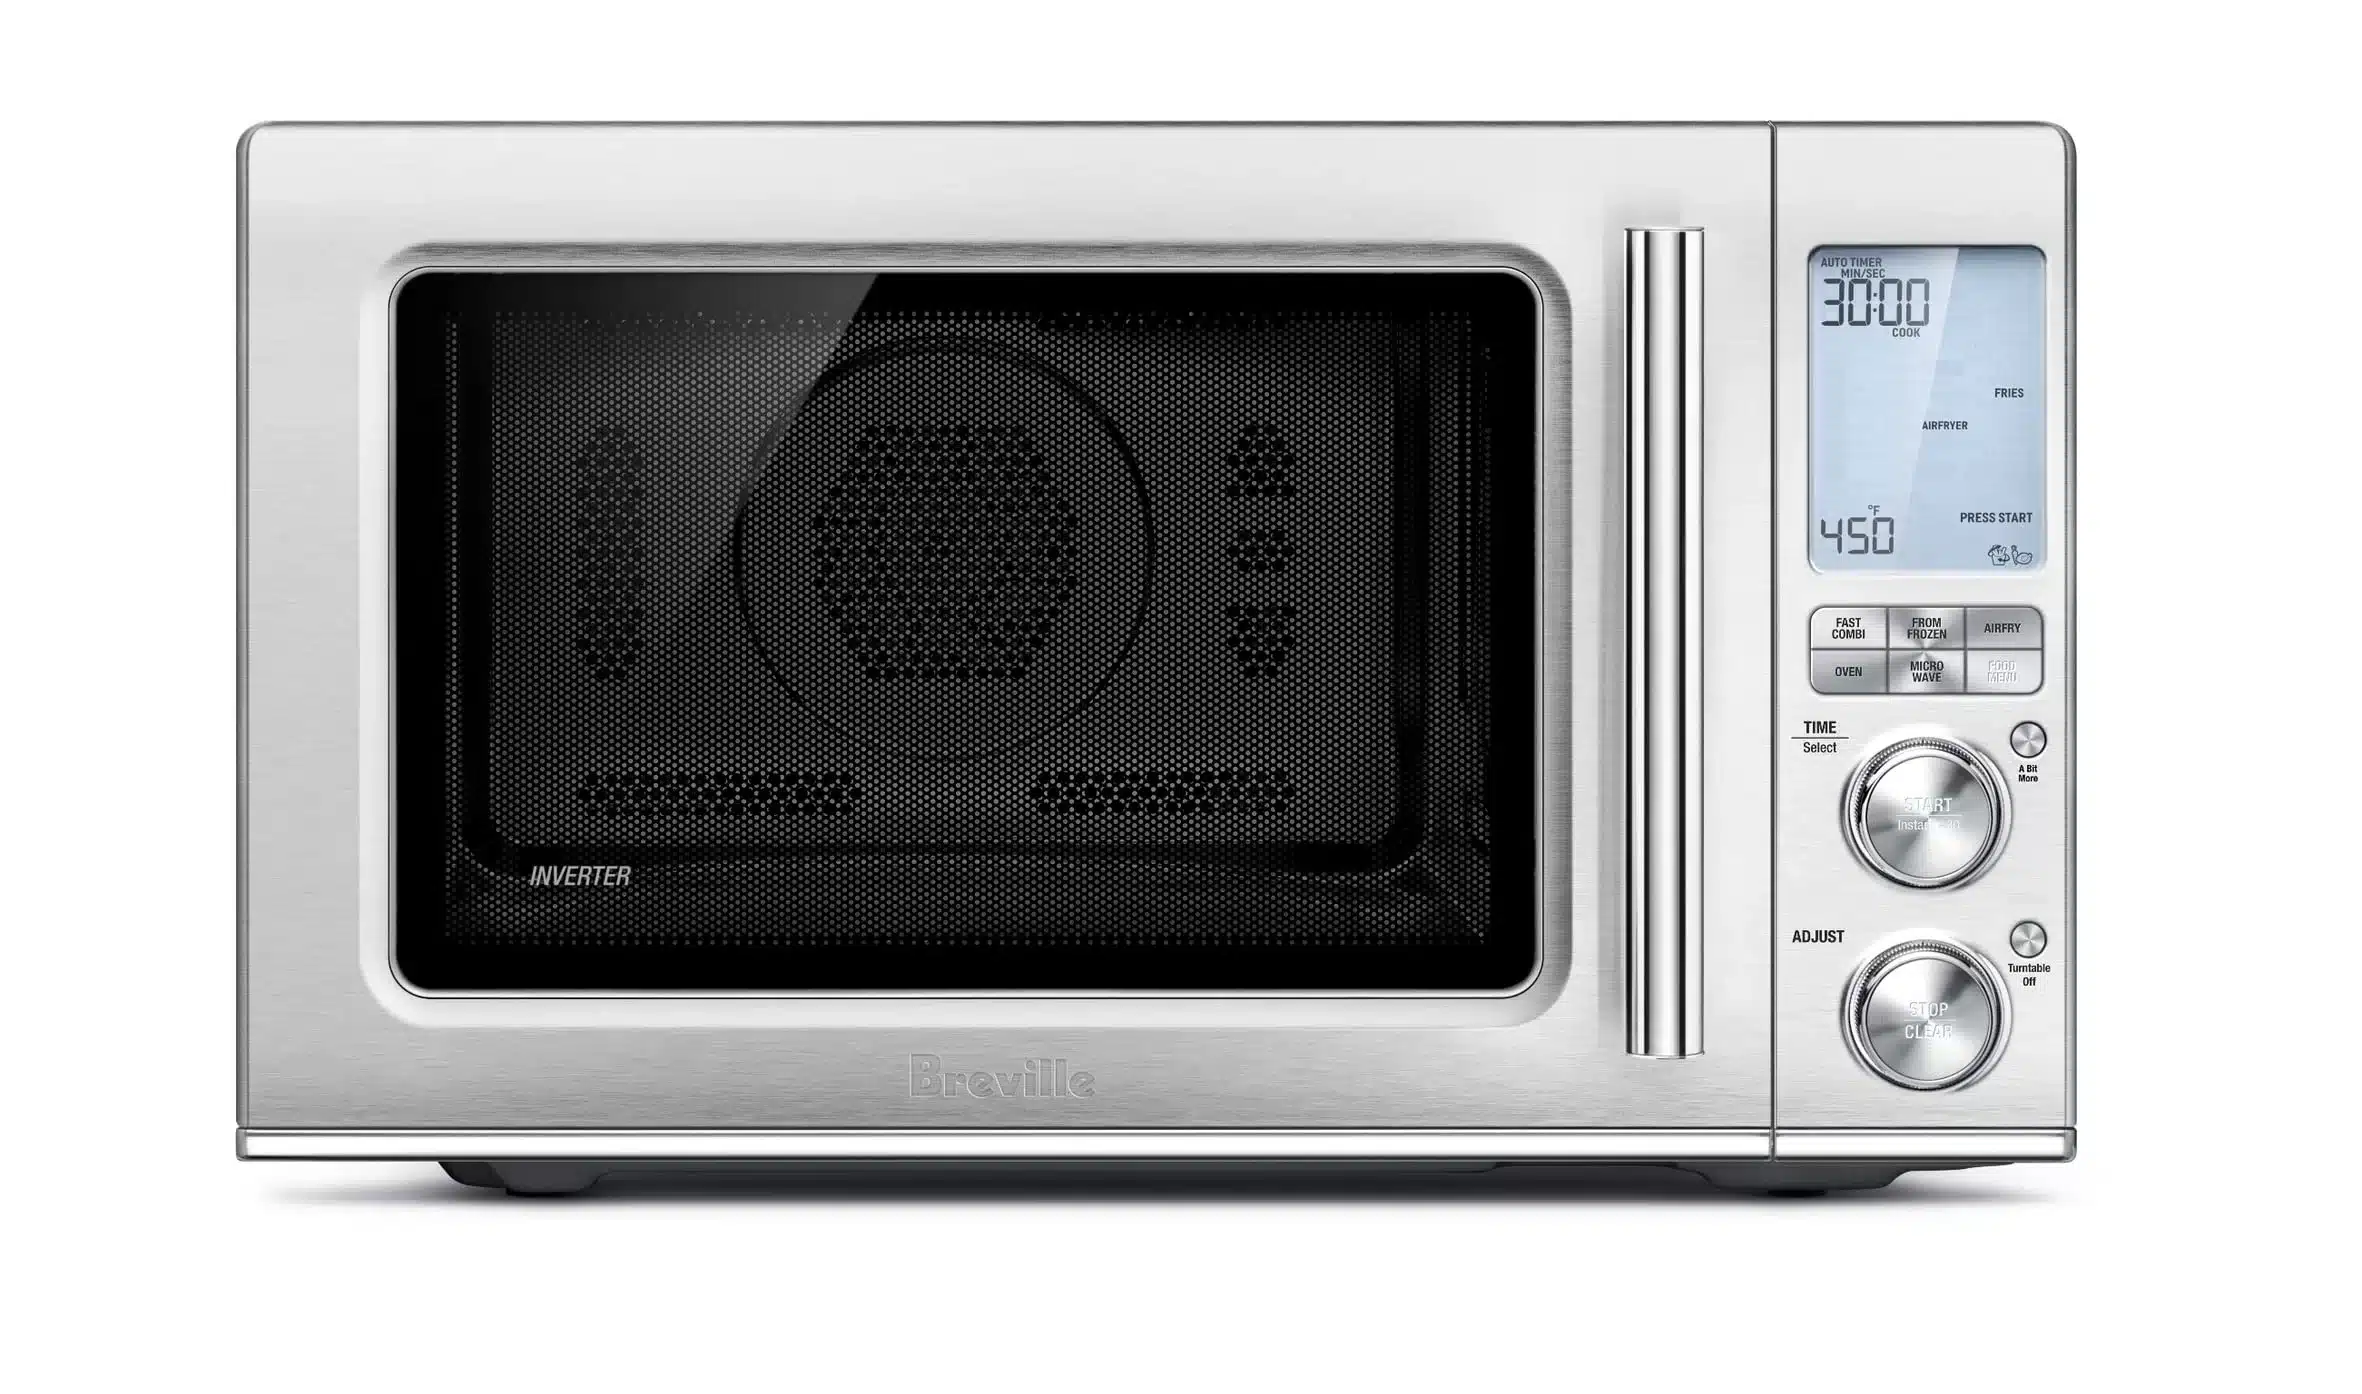 Breville Microwave 3 in 1 Guide